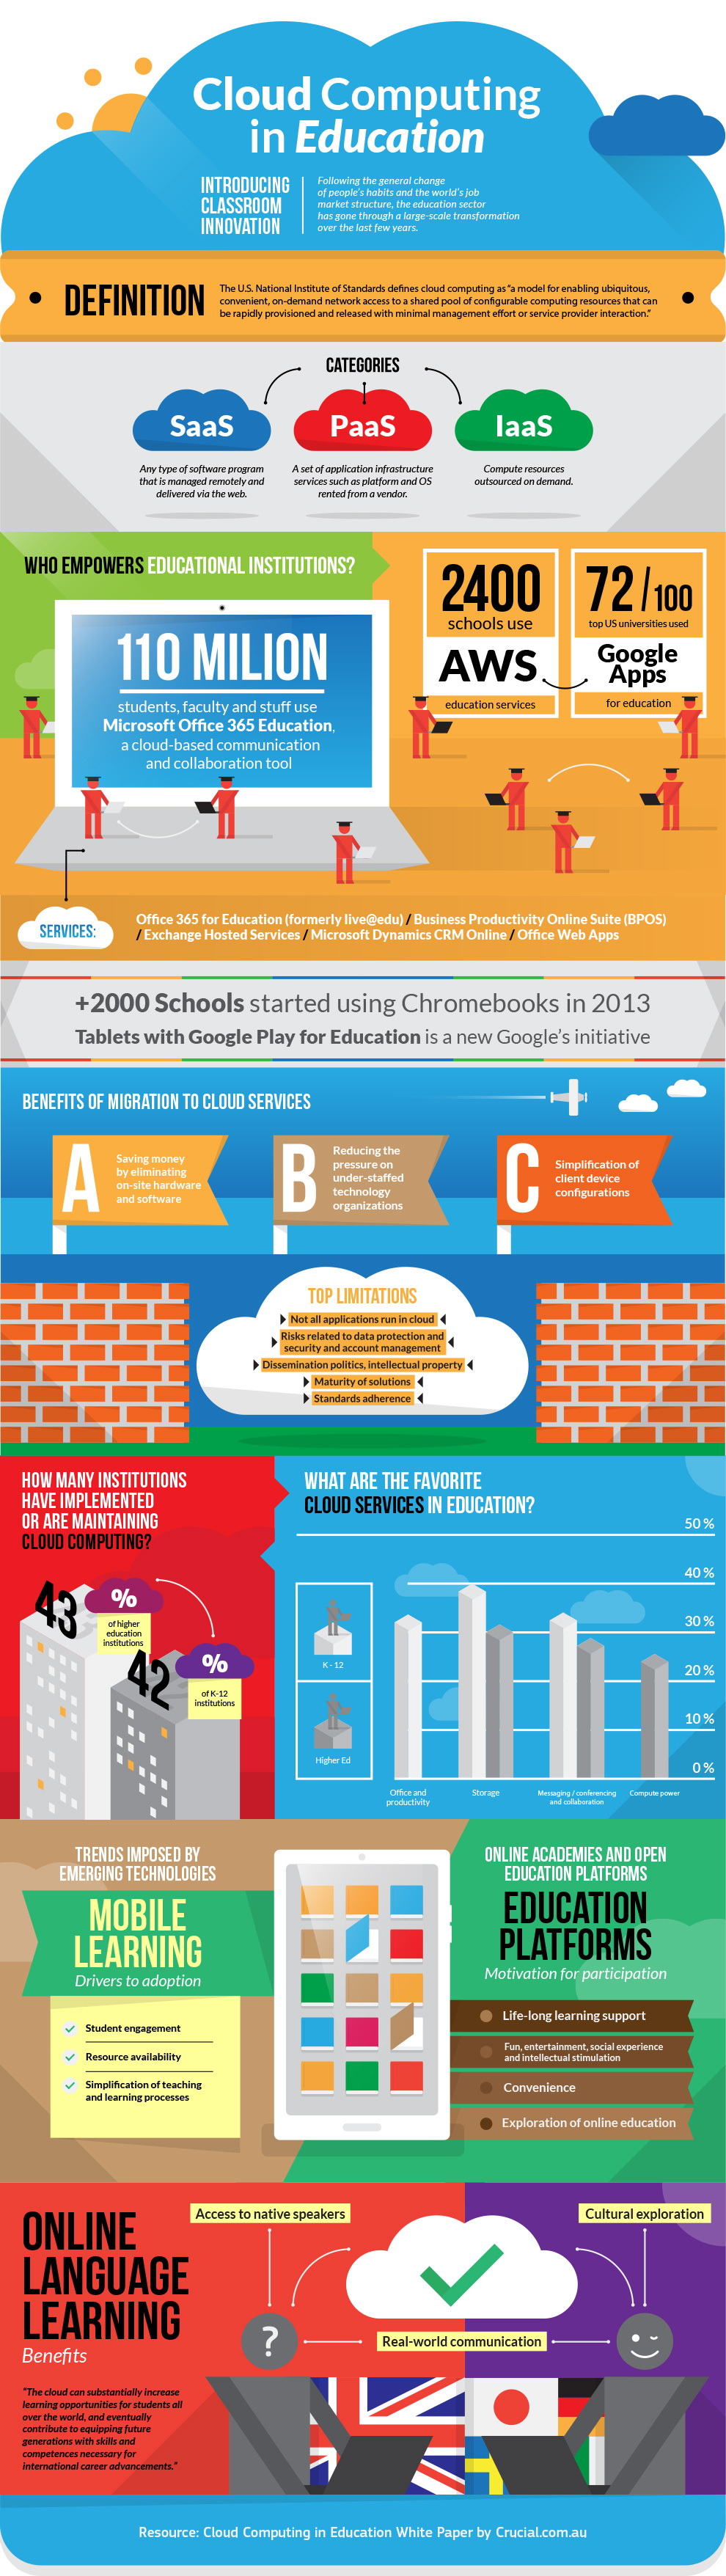 Infographic: Cloud Computing in Education